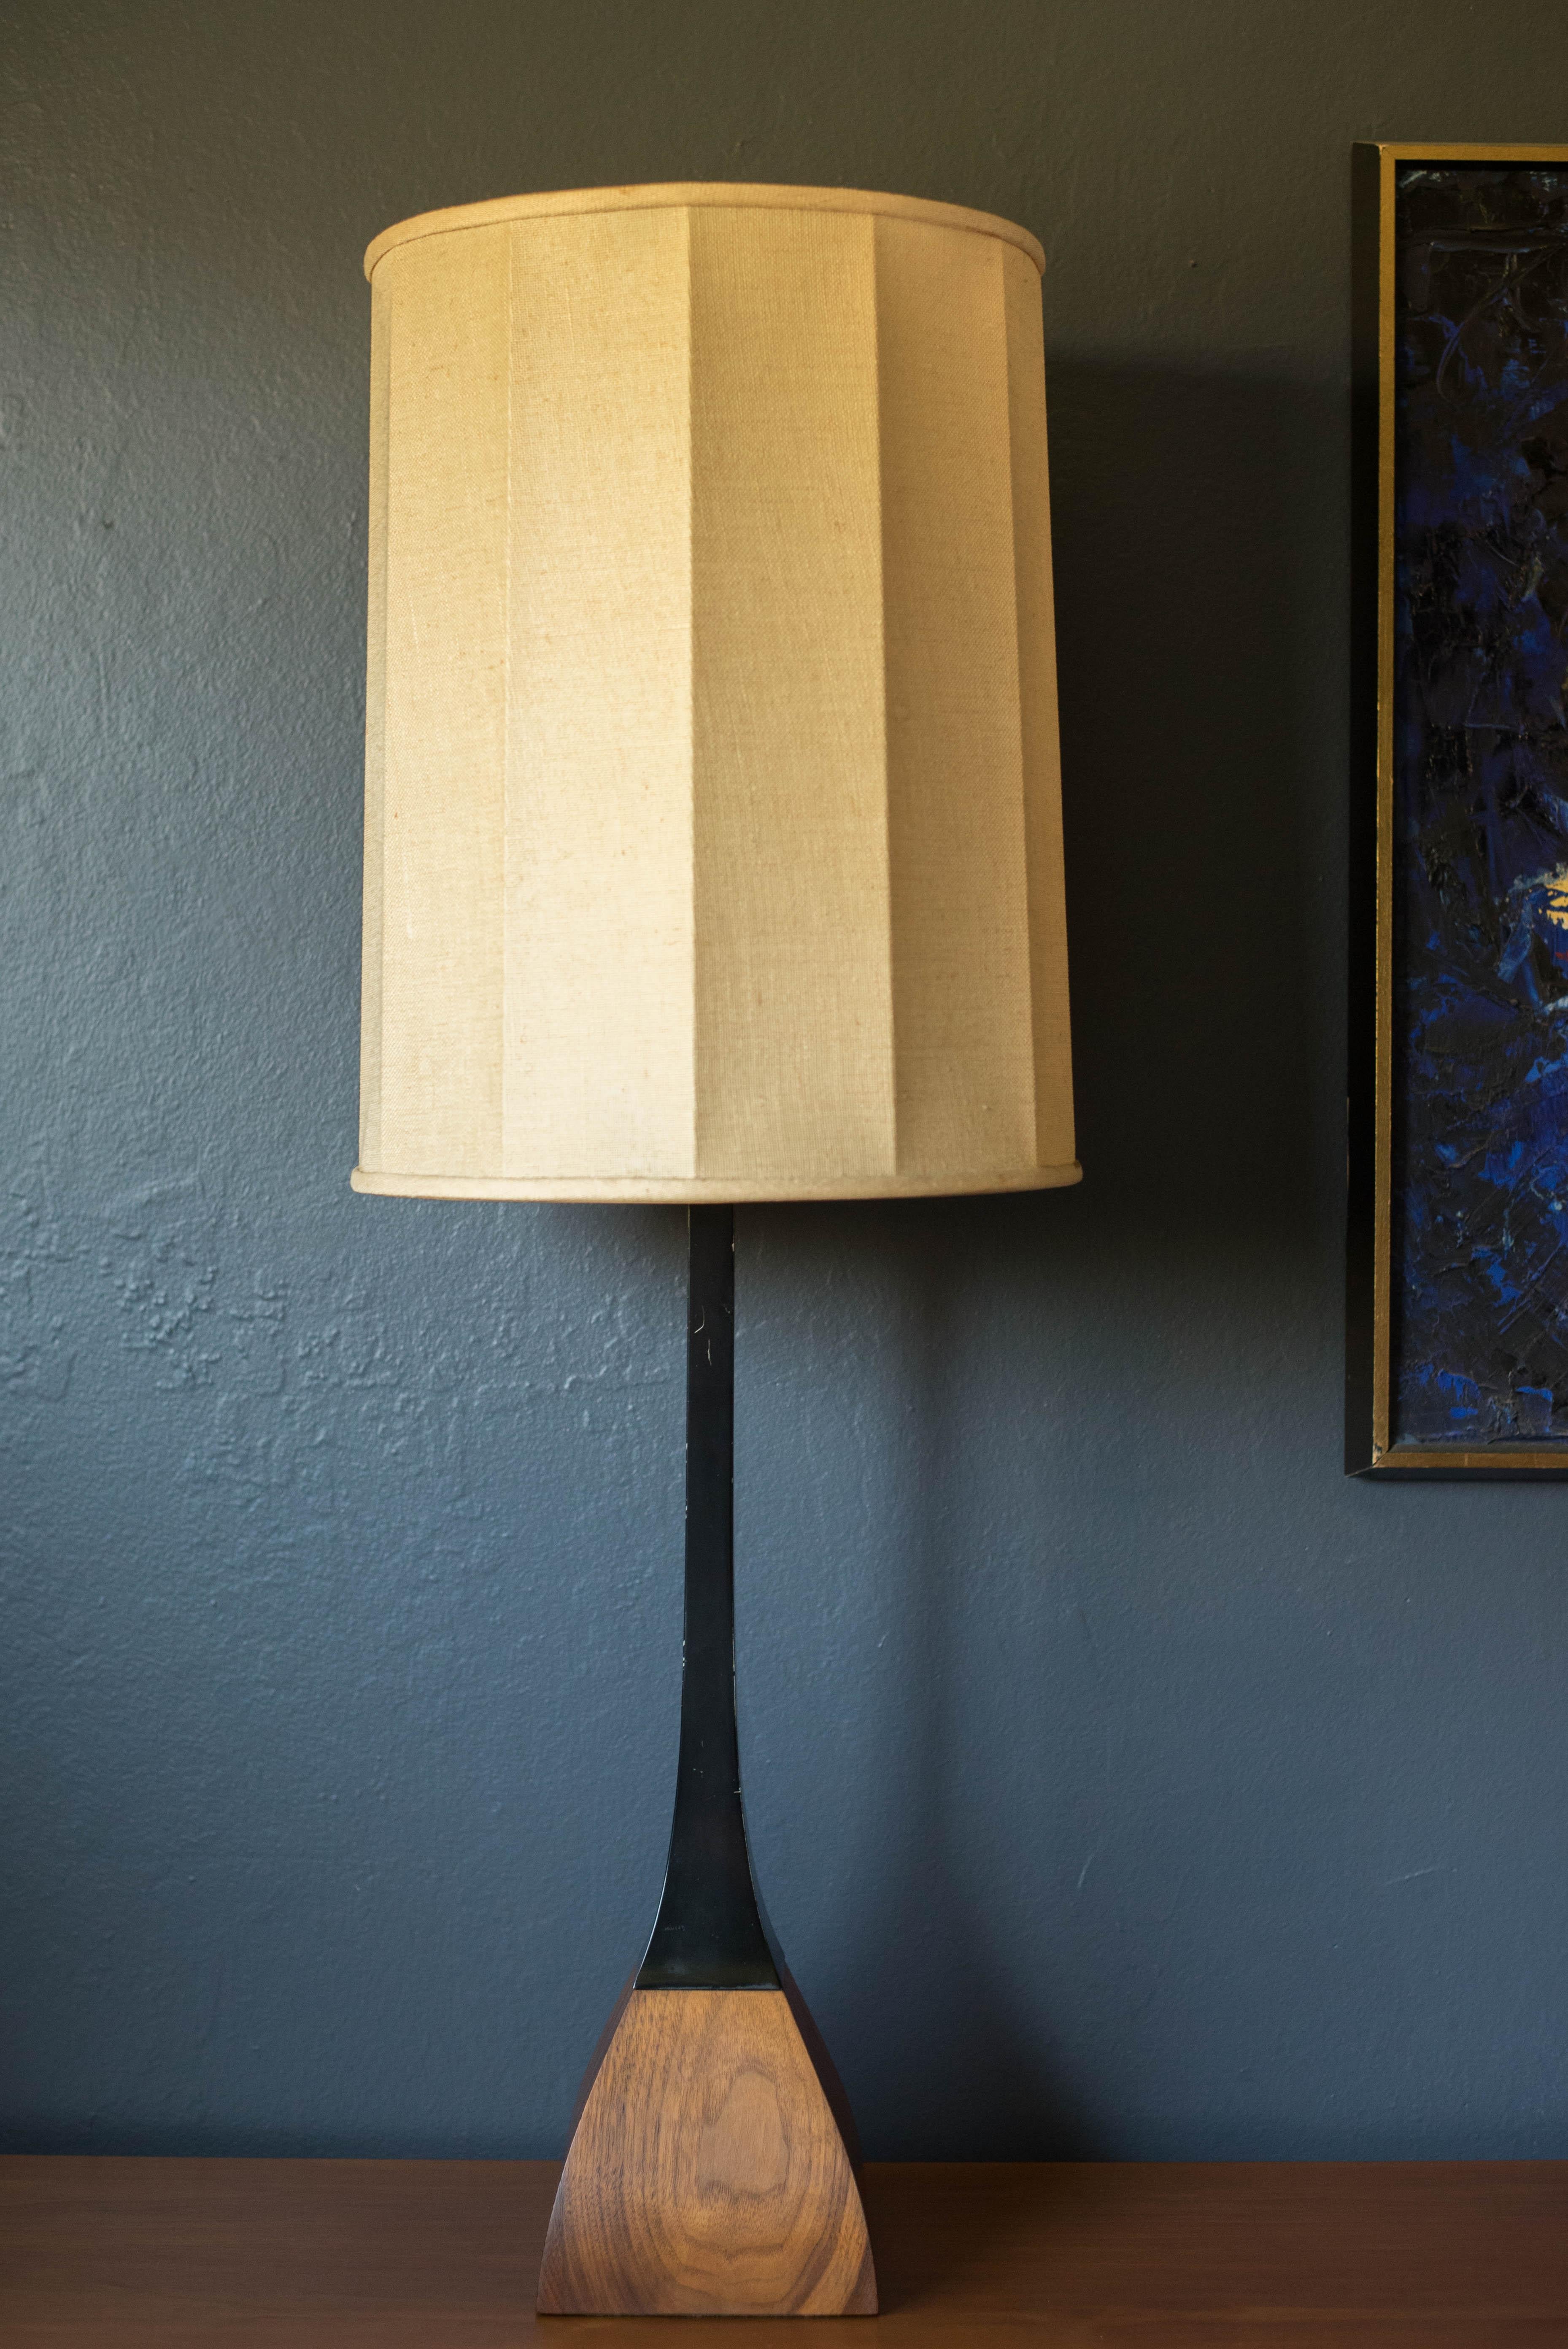 Vintage accent table lamp by Laurel Lamp Co. circa 1960s. This piece features a black stem and sculptural walnut base. Lamp shade is not included.
  




Offered by Mid Century Maddist